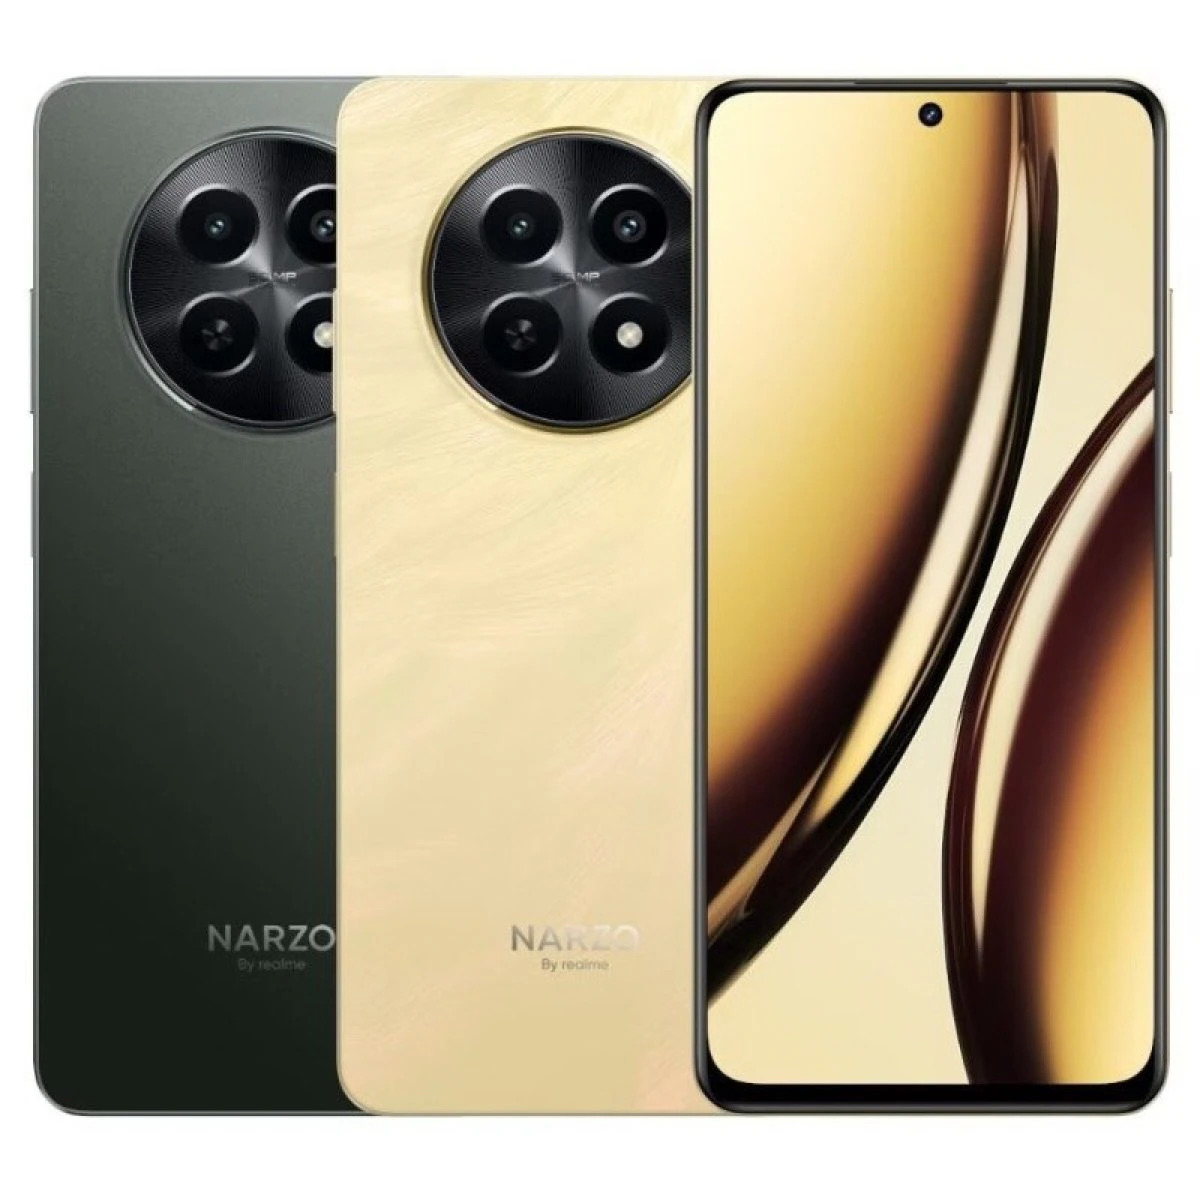 Realme Narzo N65 5G priced at Rs 11,499 for 4GB/128GB and Rs 12,499 for 6GB/128GB